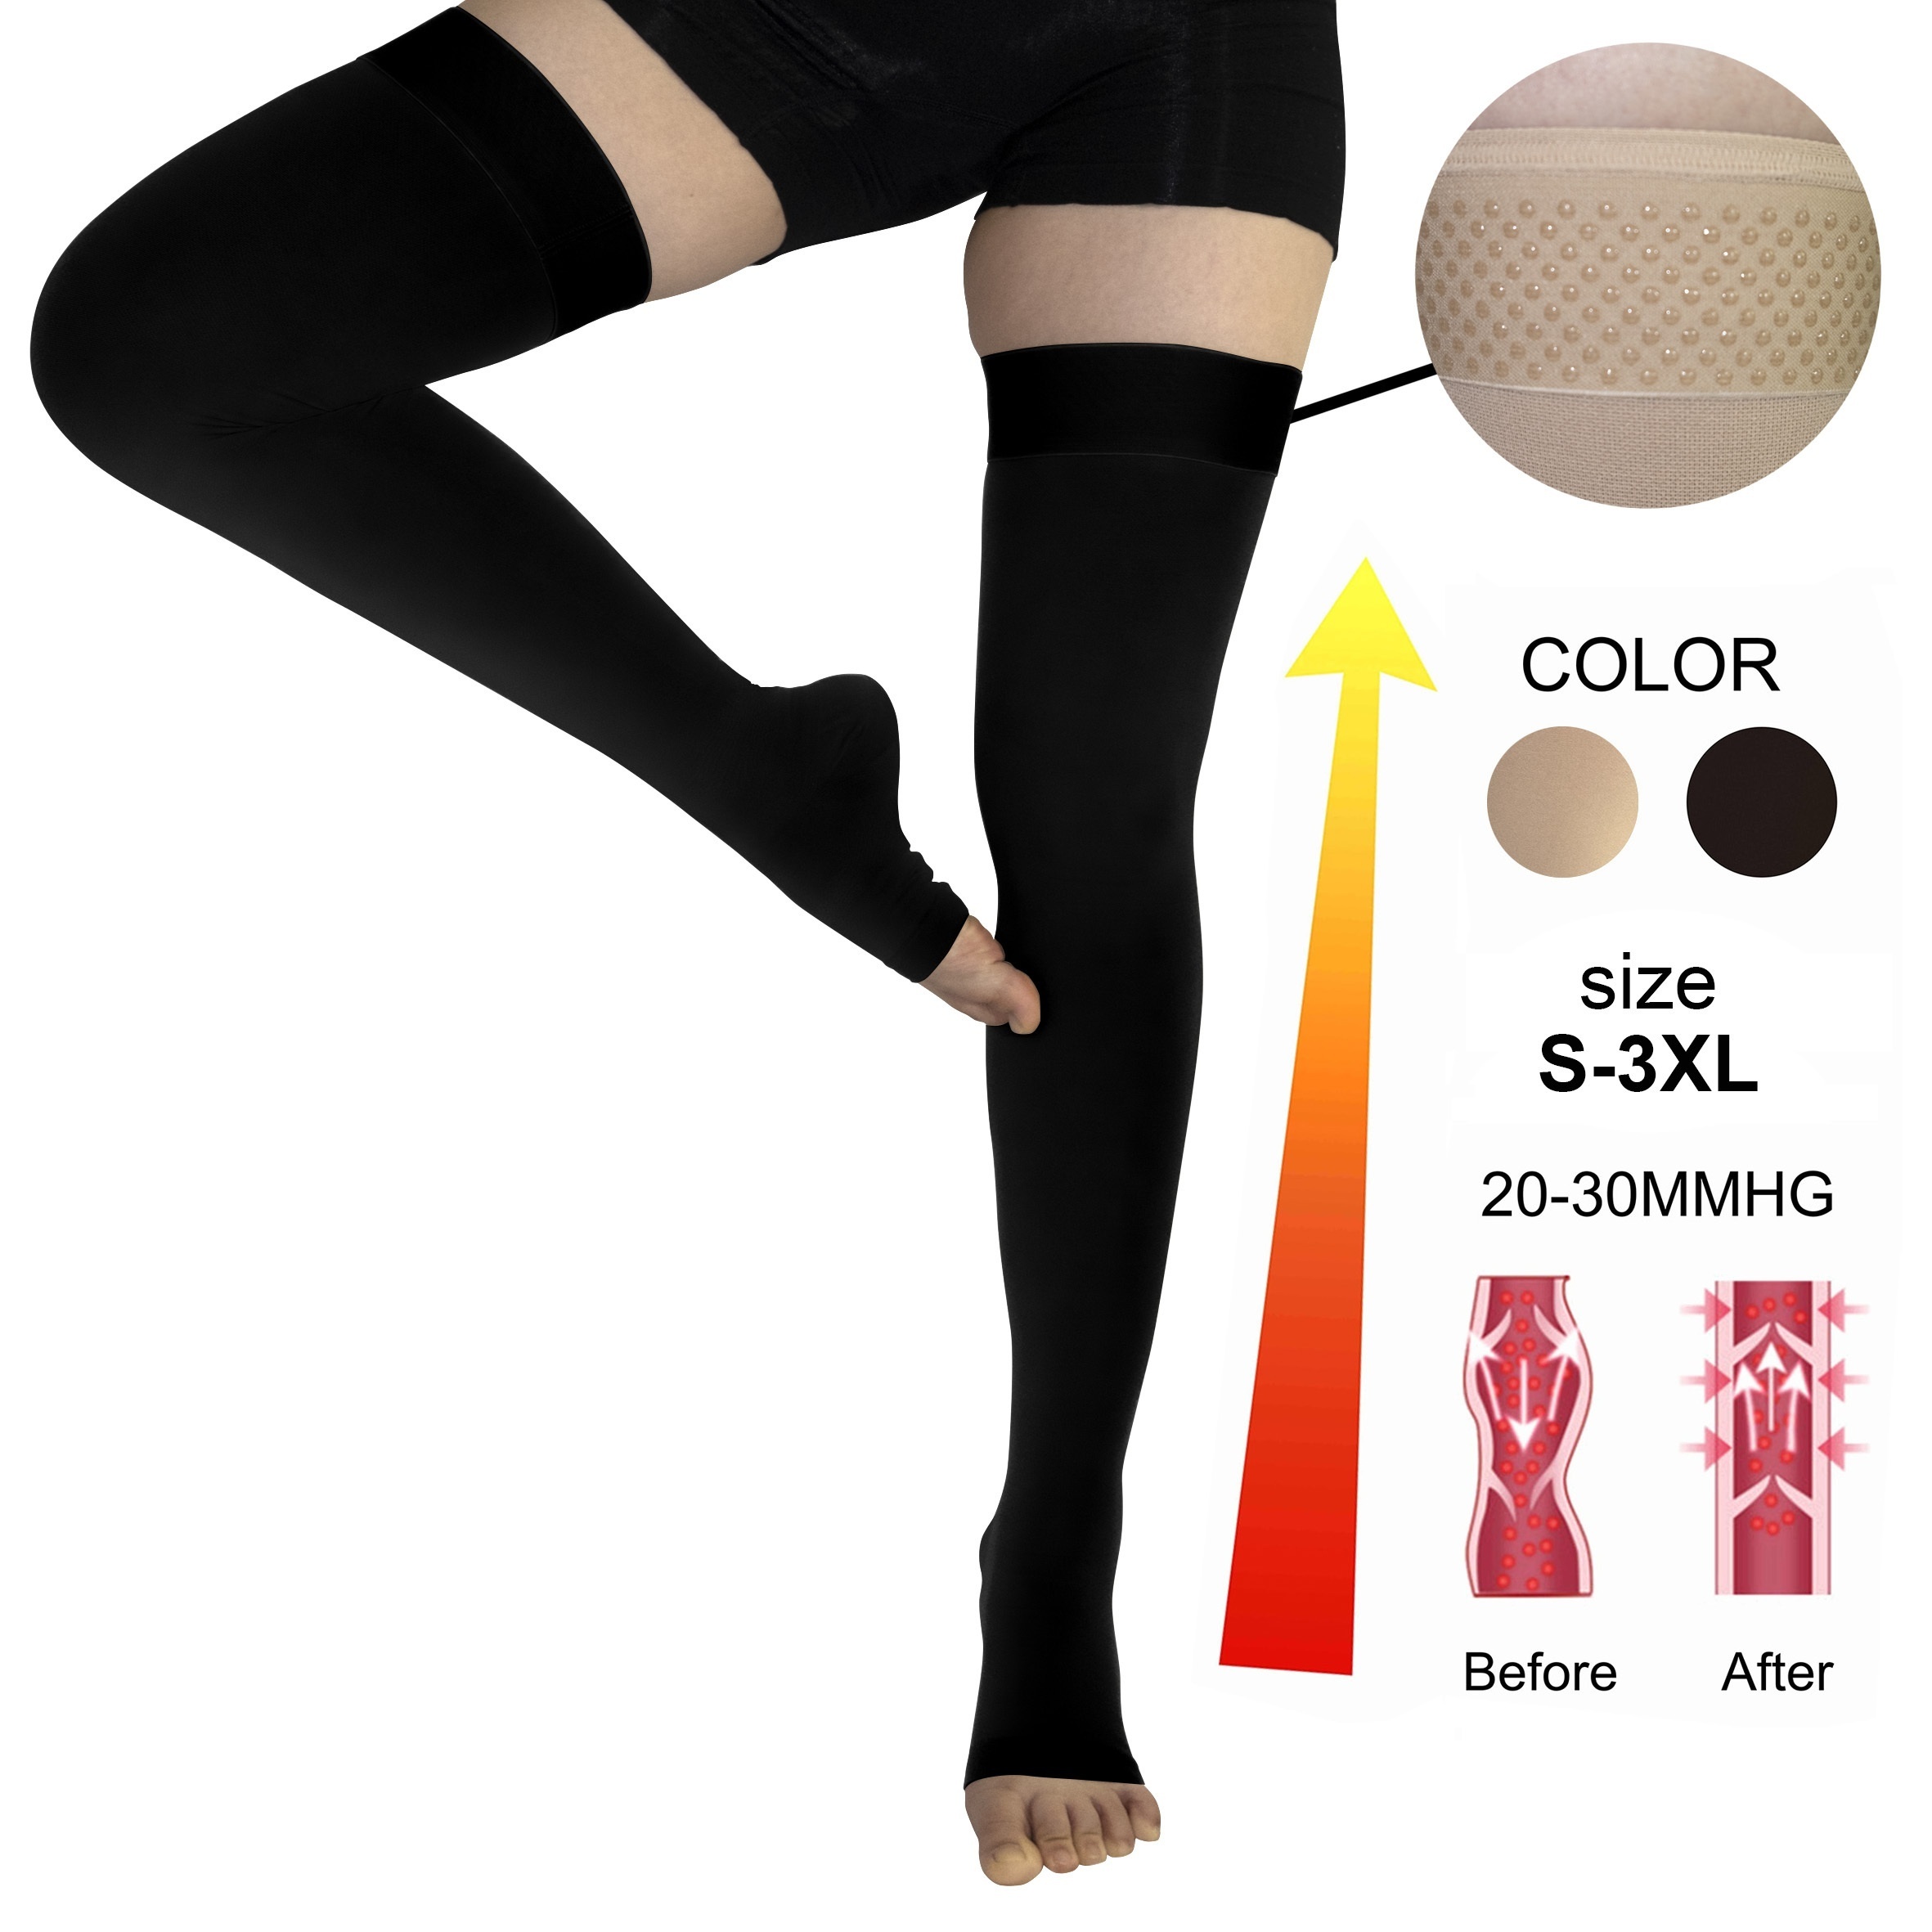 Shin Calf Sleeve 20-30 mmHg Medical Compression Circulation Extra Wide Plus  Size Big Tall Leg Thick Calves Firm Support (Black, Extra Wide Calf 5XL)